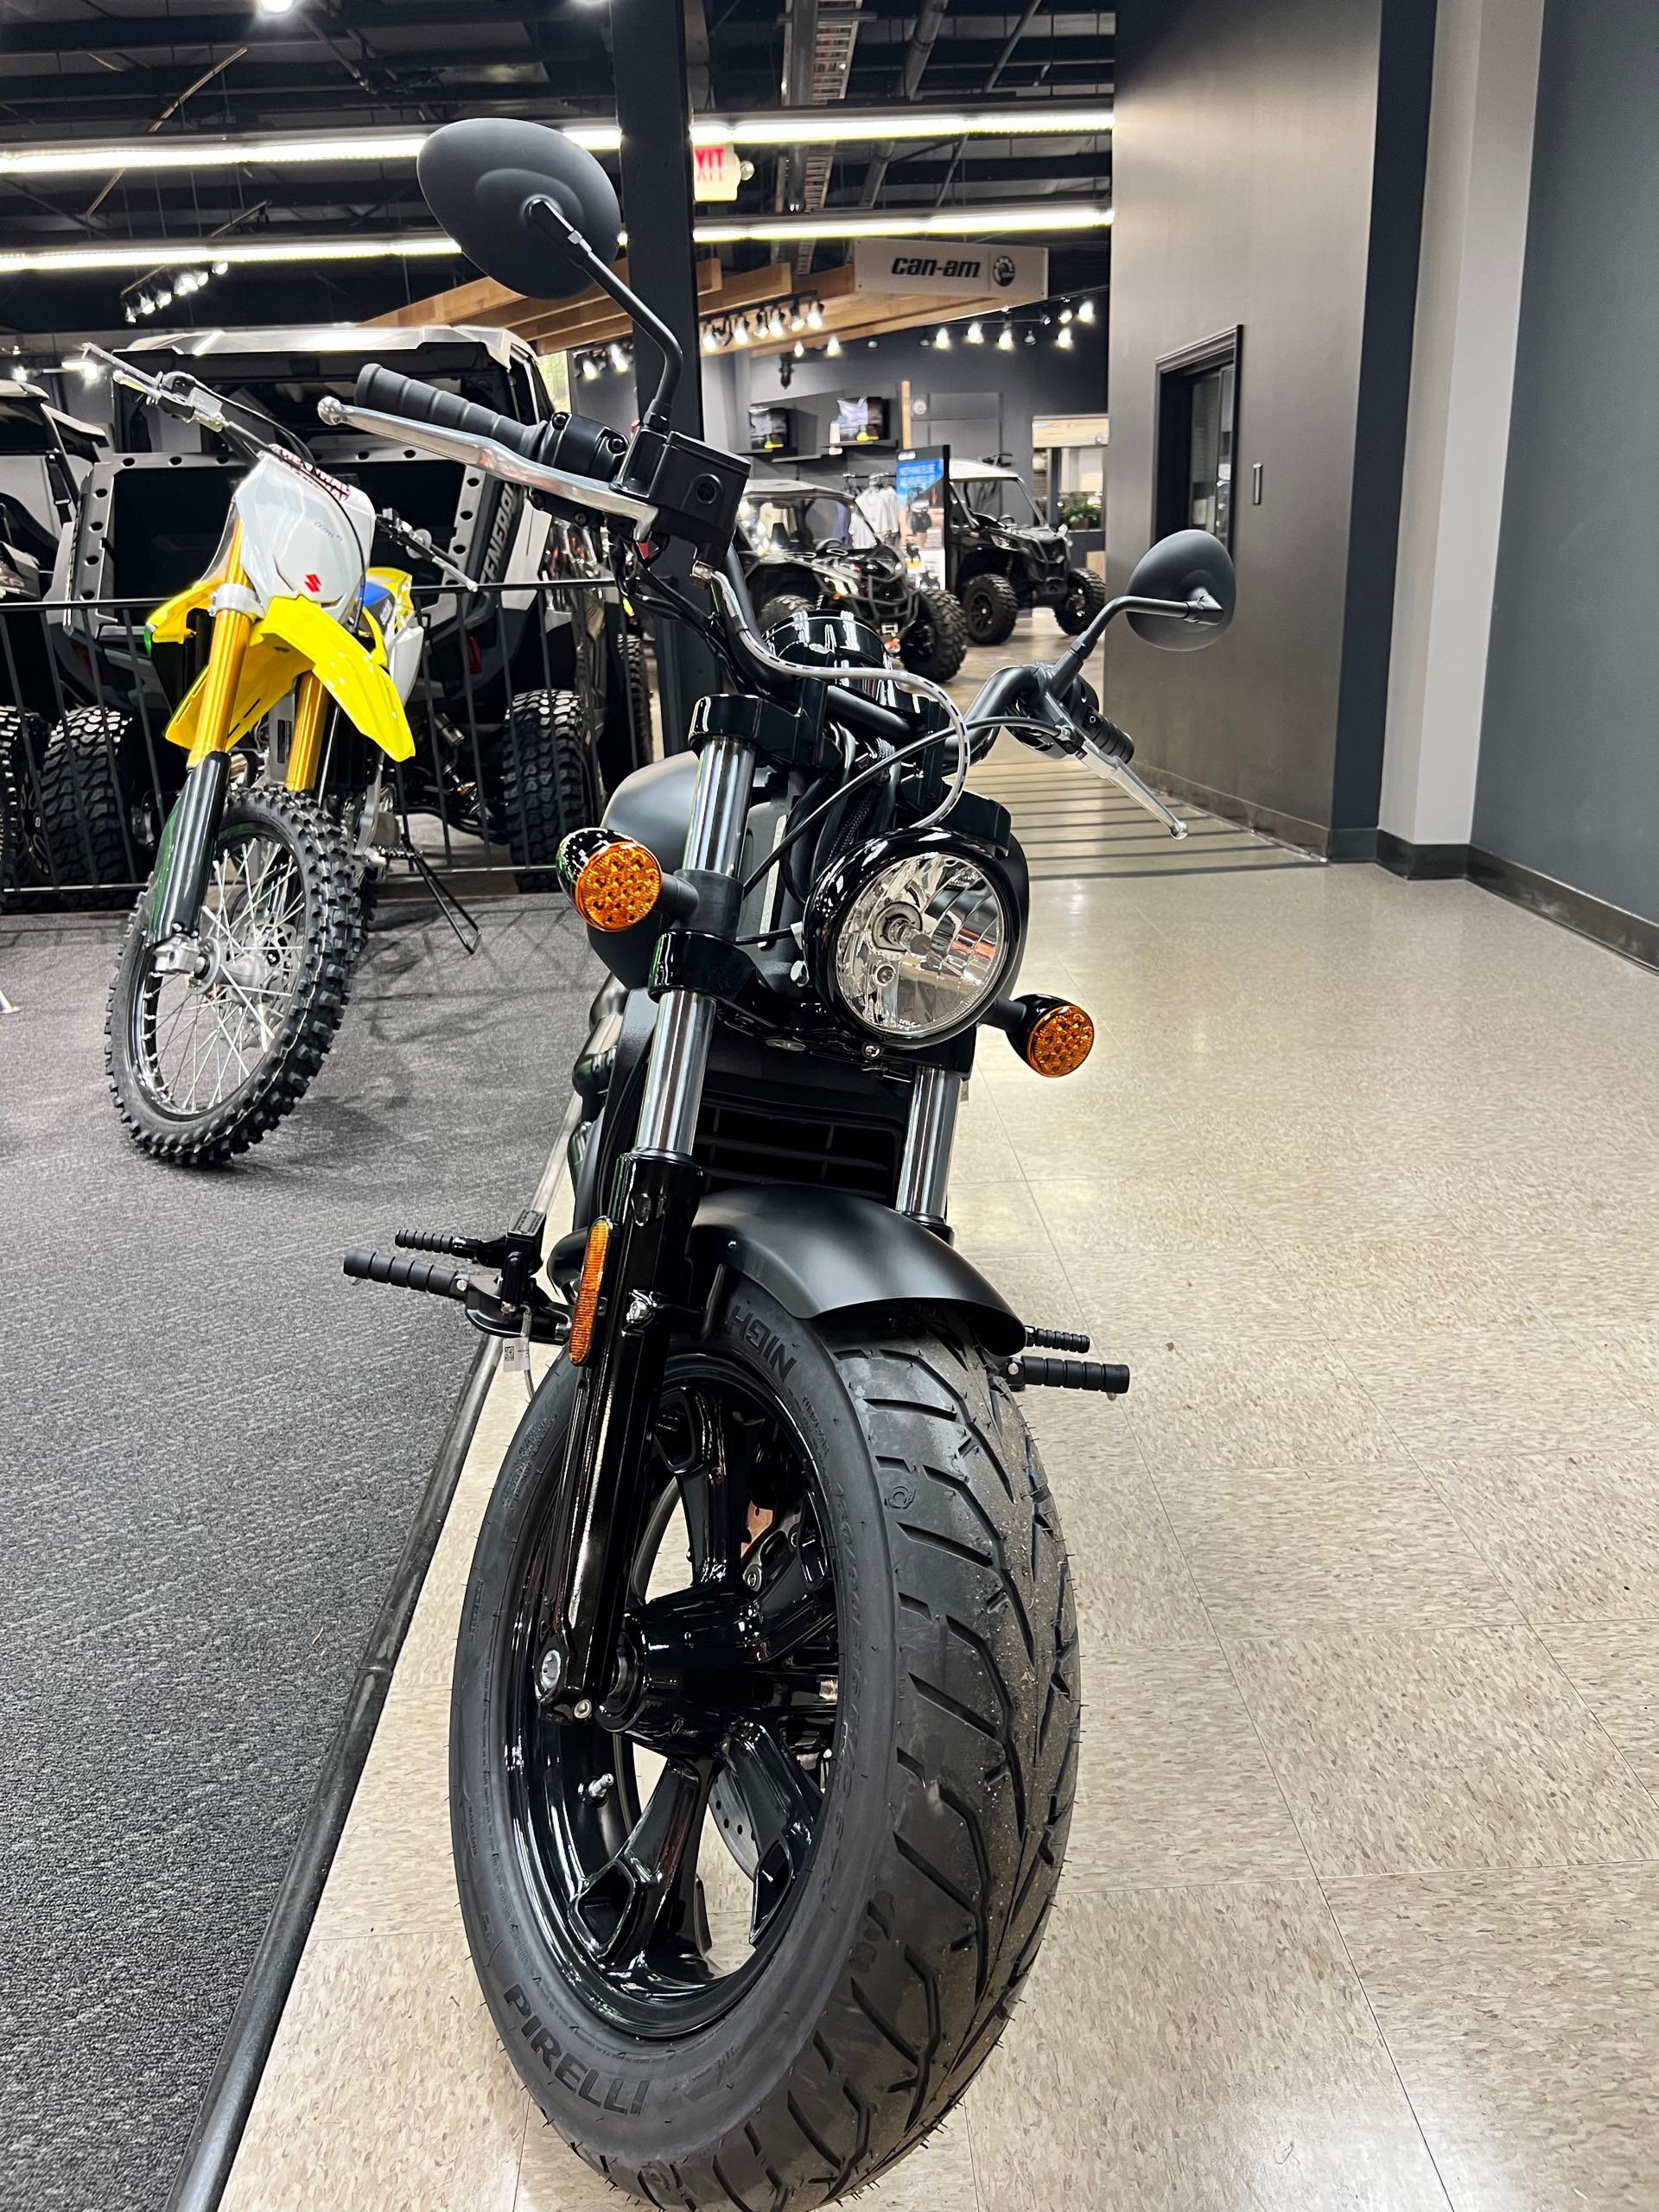 2023 Indian Motorcycle Scout Bobber Sixty at Sloans Motorcycle ATV, Murfreesboro, TN, 37129